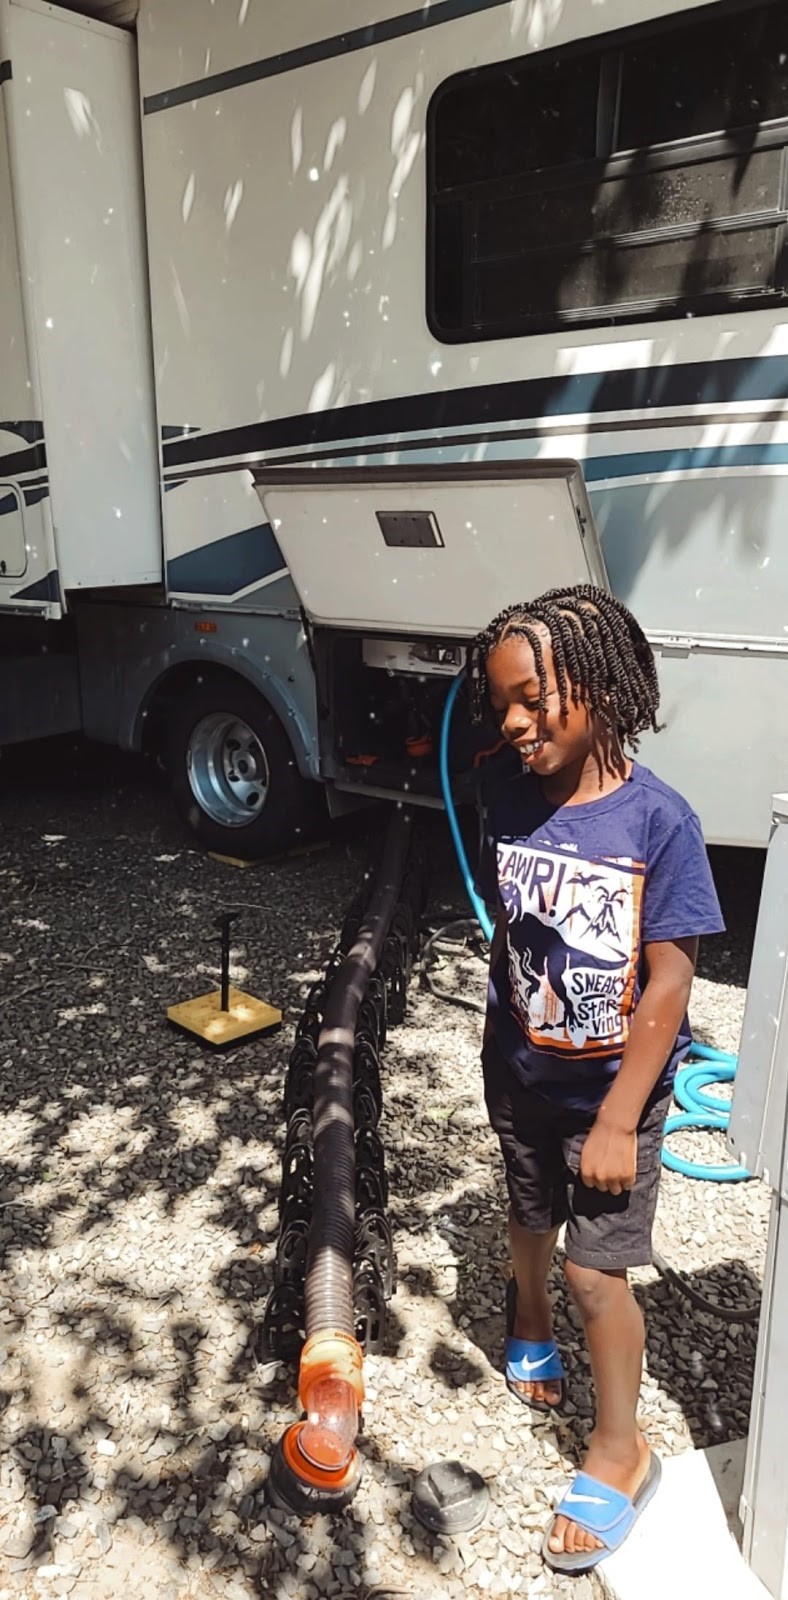 10 Life Skills Your Kids Can Learn Through RVing 2